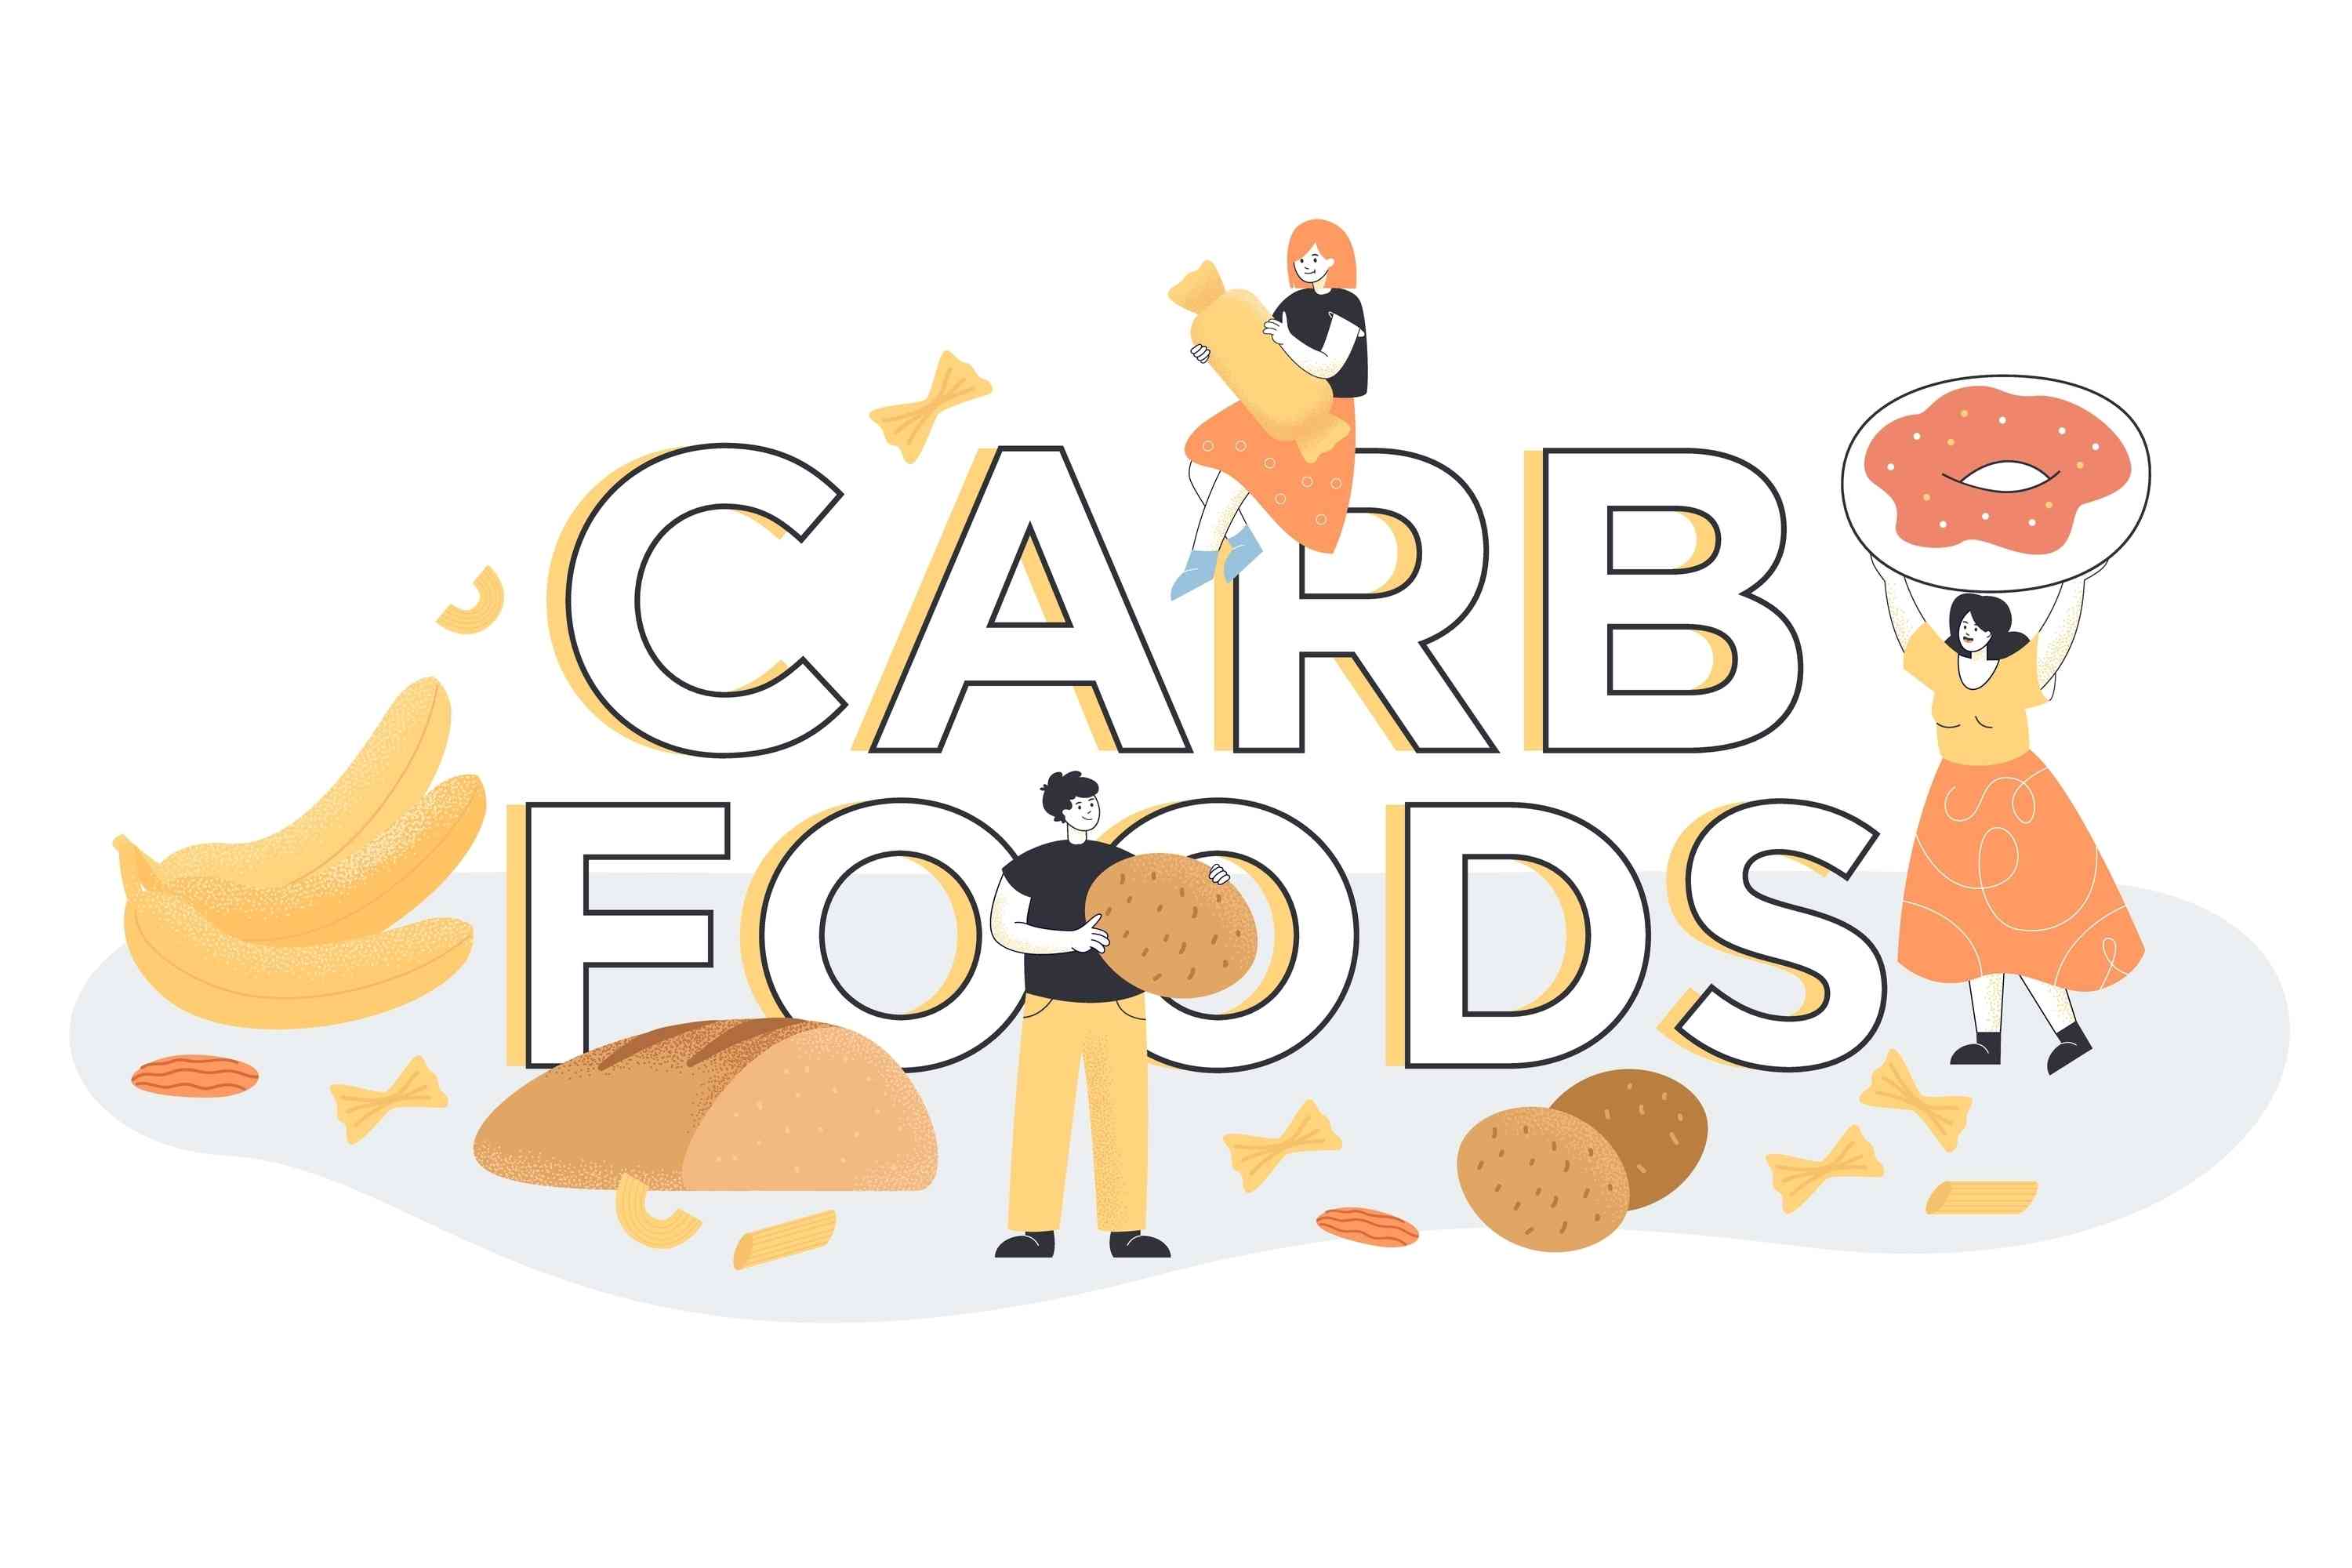 9 High Carb Foods to Avoid for a Low-Carb Diet